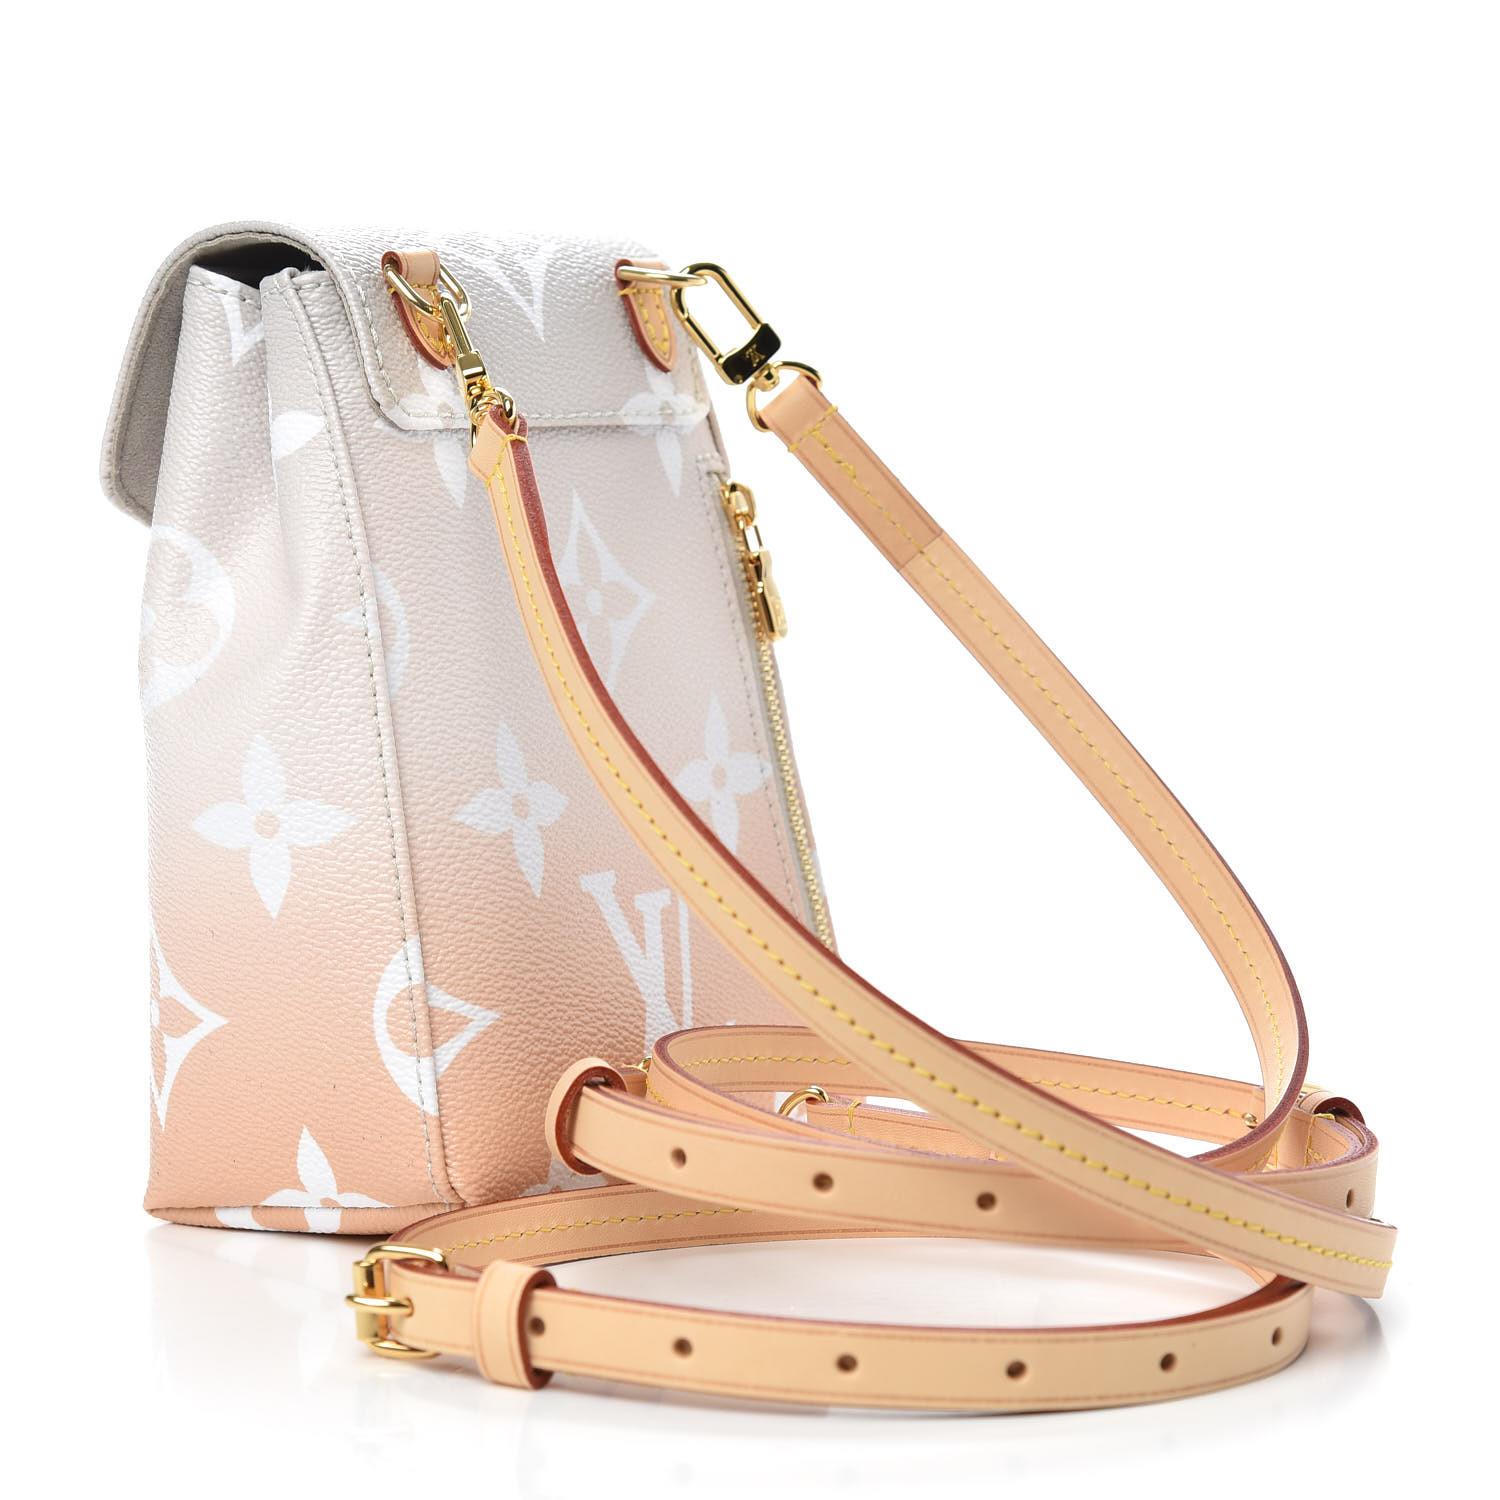 This petite backpack is made of monogram coated canvas in a stunning beige to pink gradient. The backpack features a vertical zipper pocket on the back, adjustable vachetta leather shoulder straps, and a magnetic vachetta belt on the flap that opens